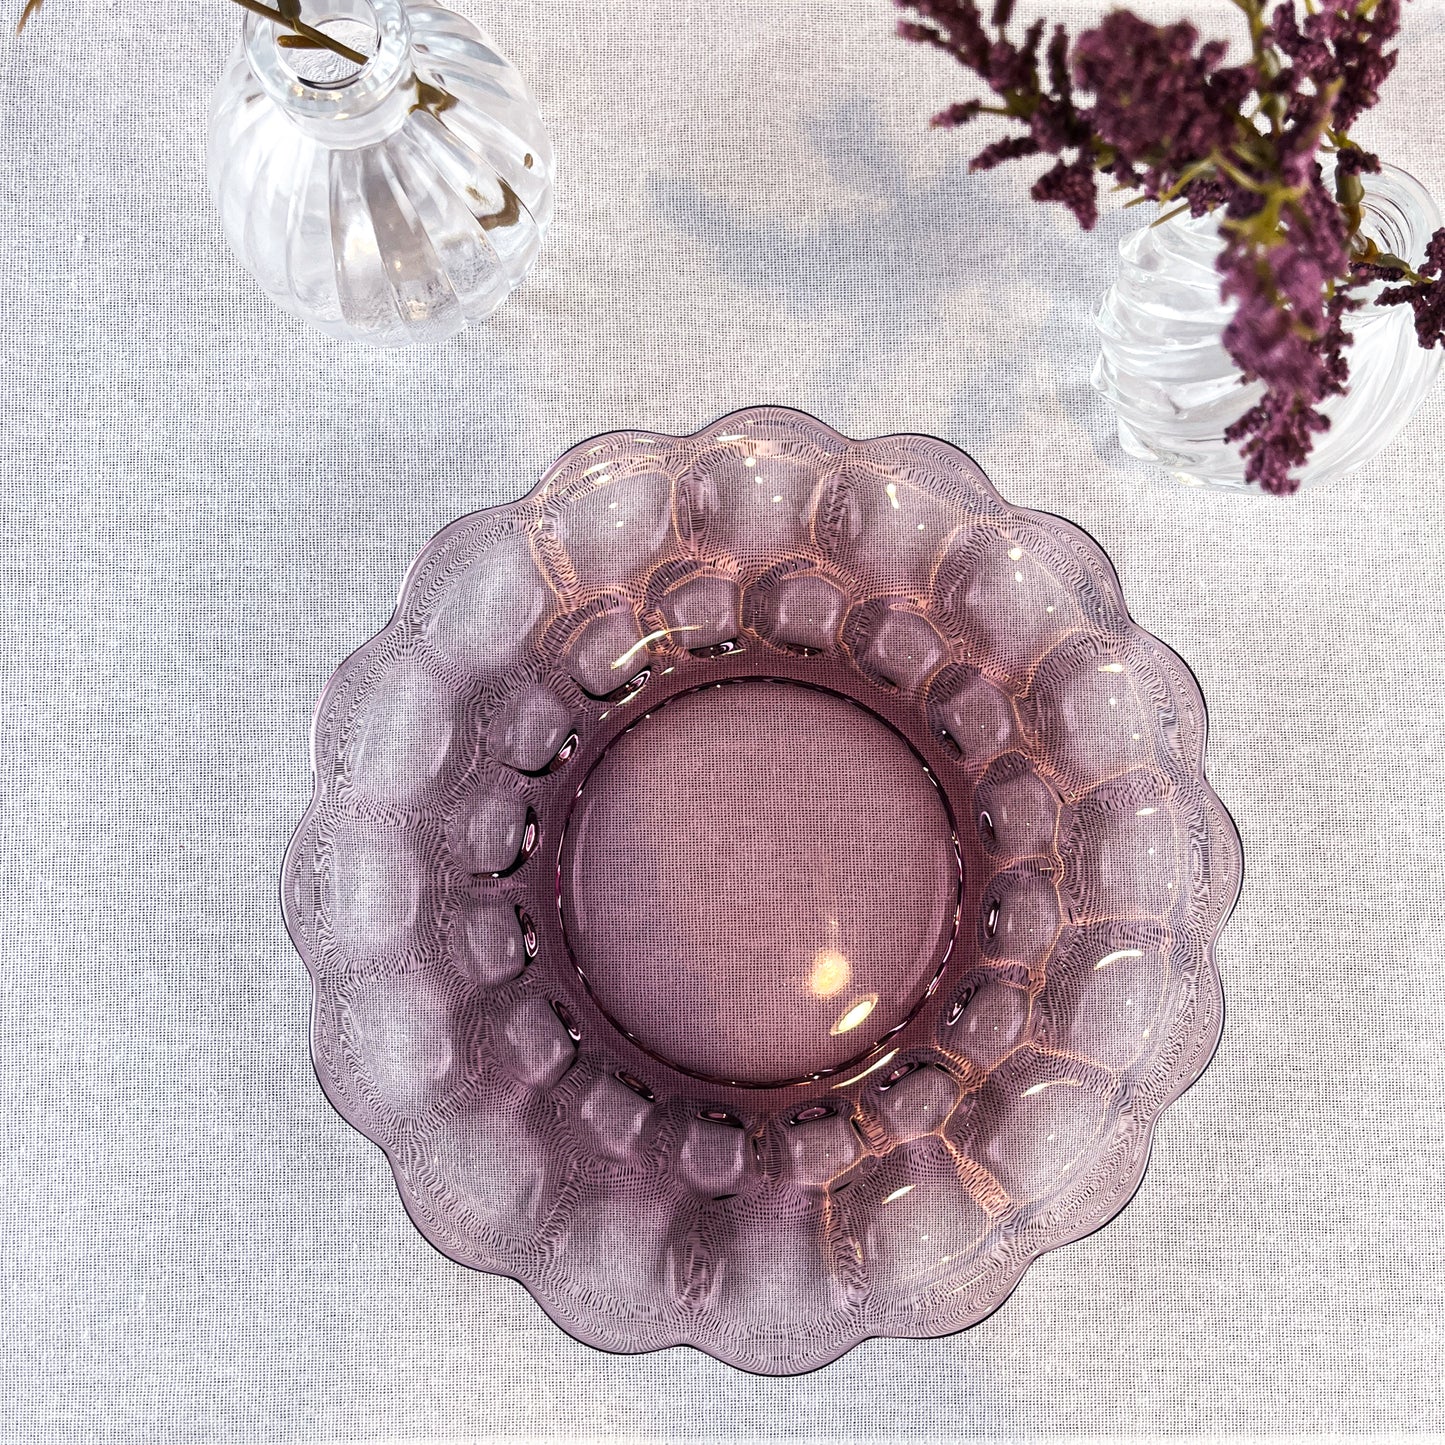 Imperial Glass Provincial Amethyst Thumbprint Salad Luncheon Plates - Set of 4